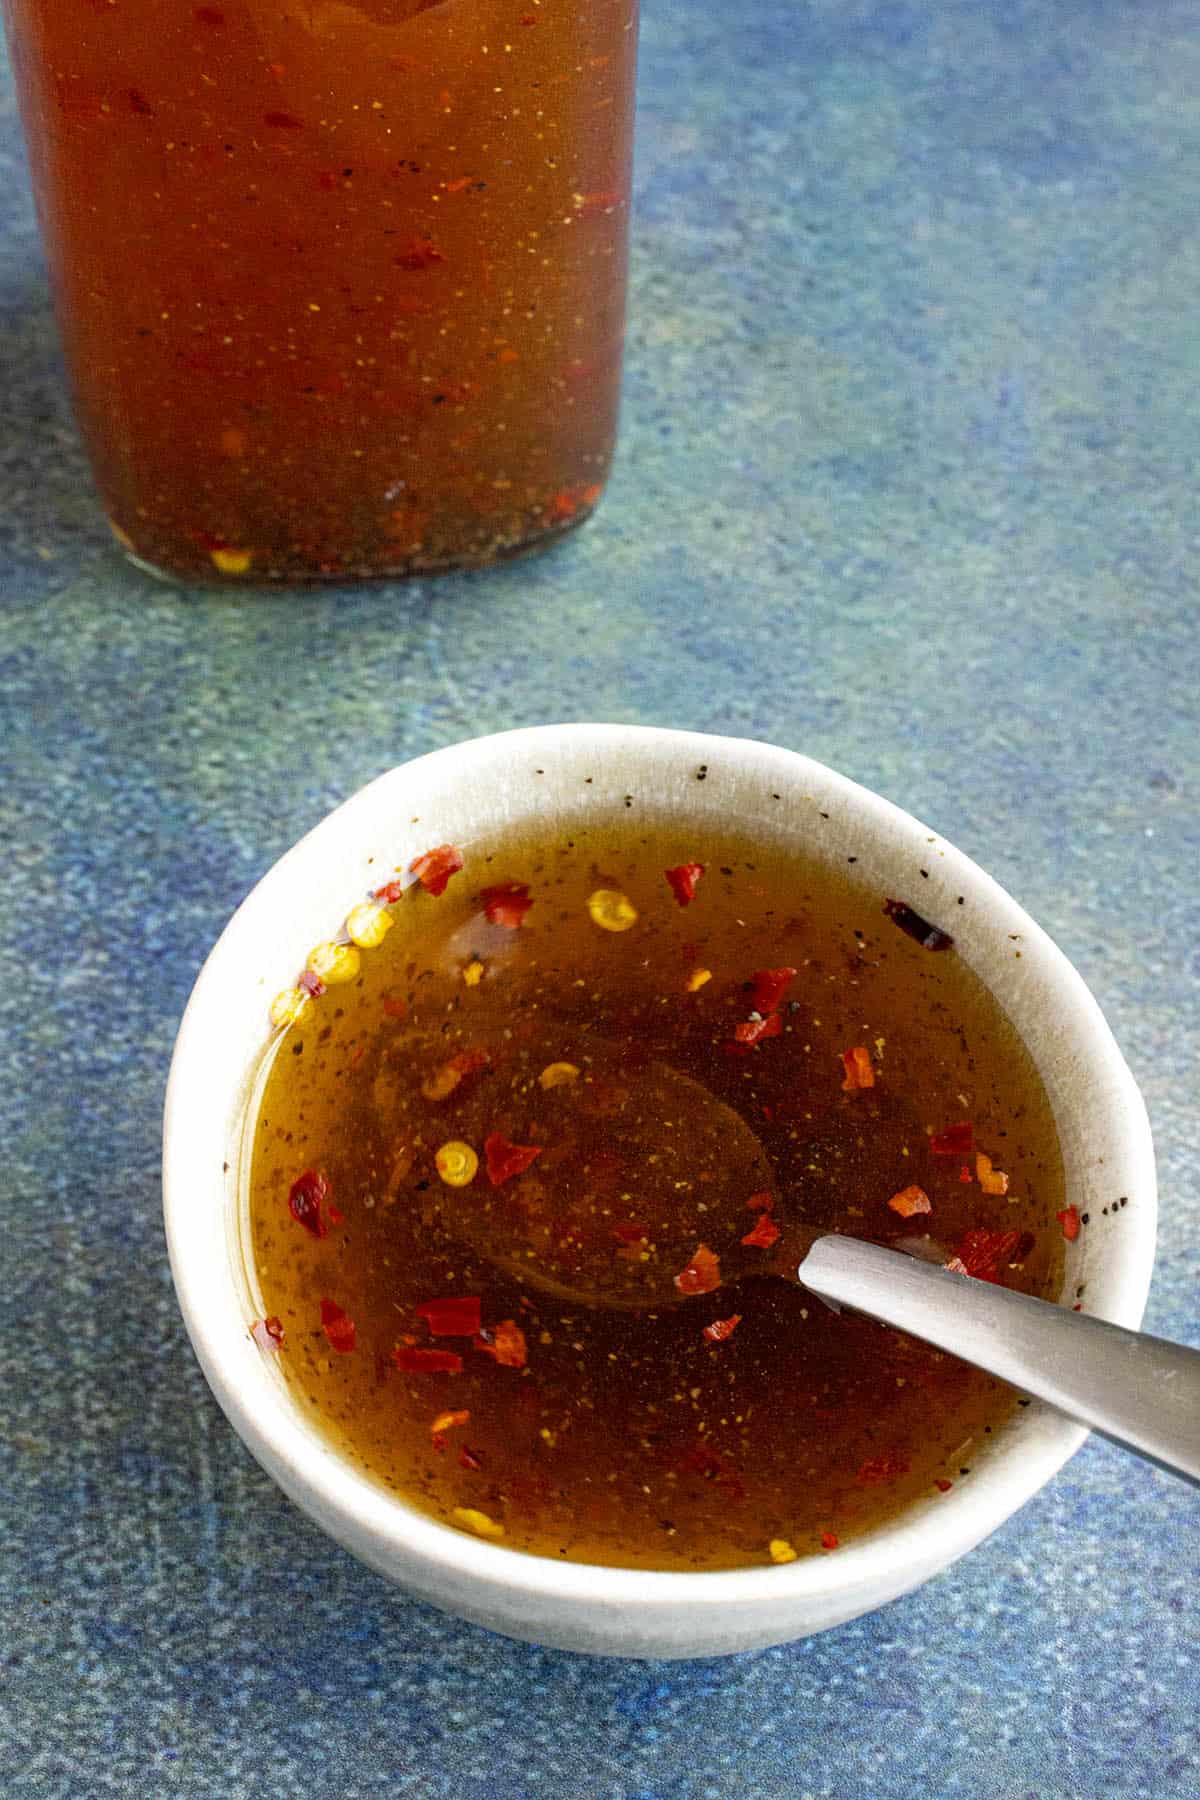 How to Make Spicy Vinegar